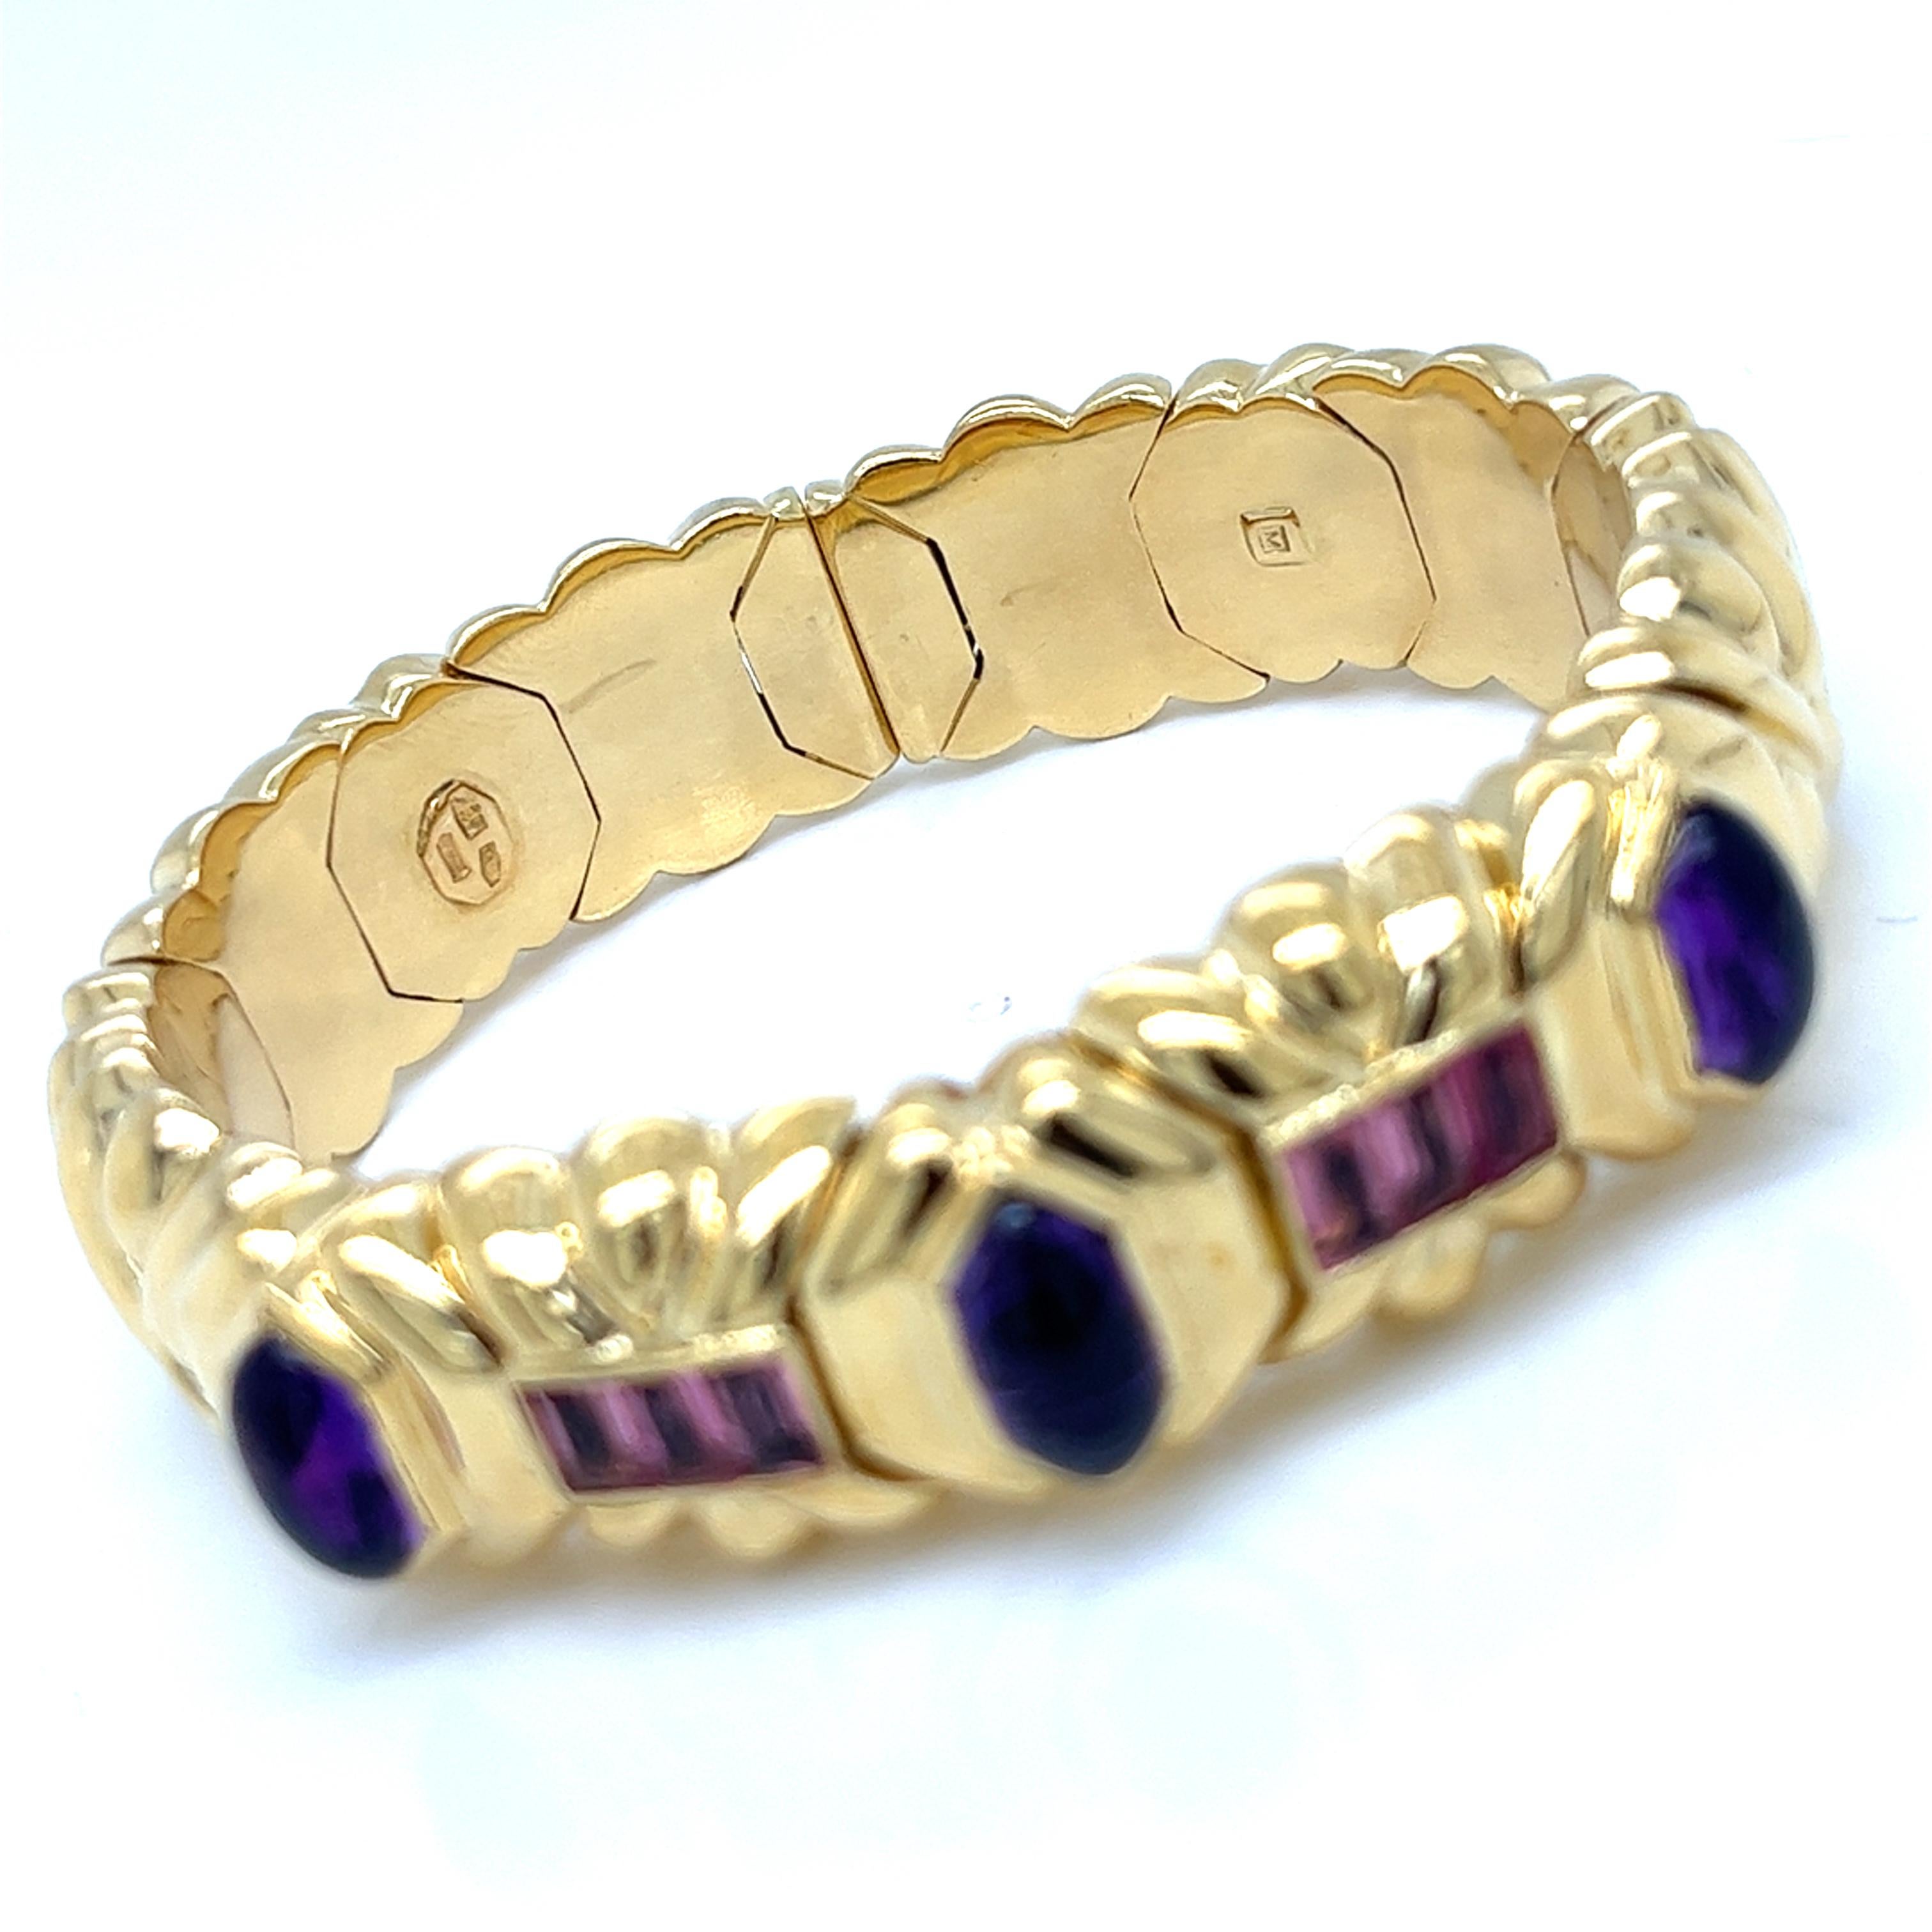 Hexagon Cut 18Kt Yellow Gold Bracelet with Amethyst and Tourmaline. Total Weights 72 grams For Sale